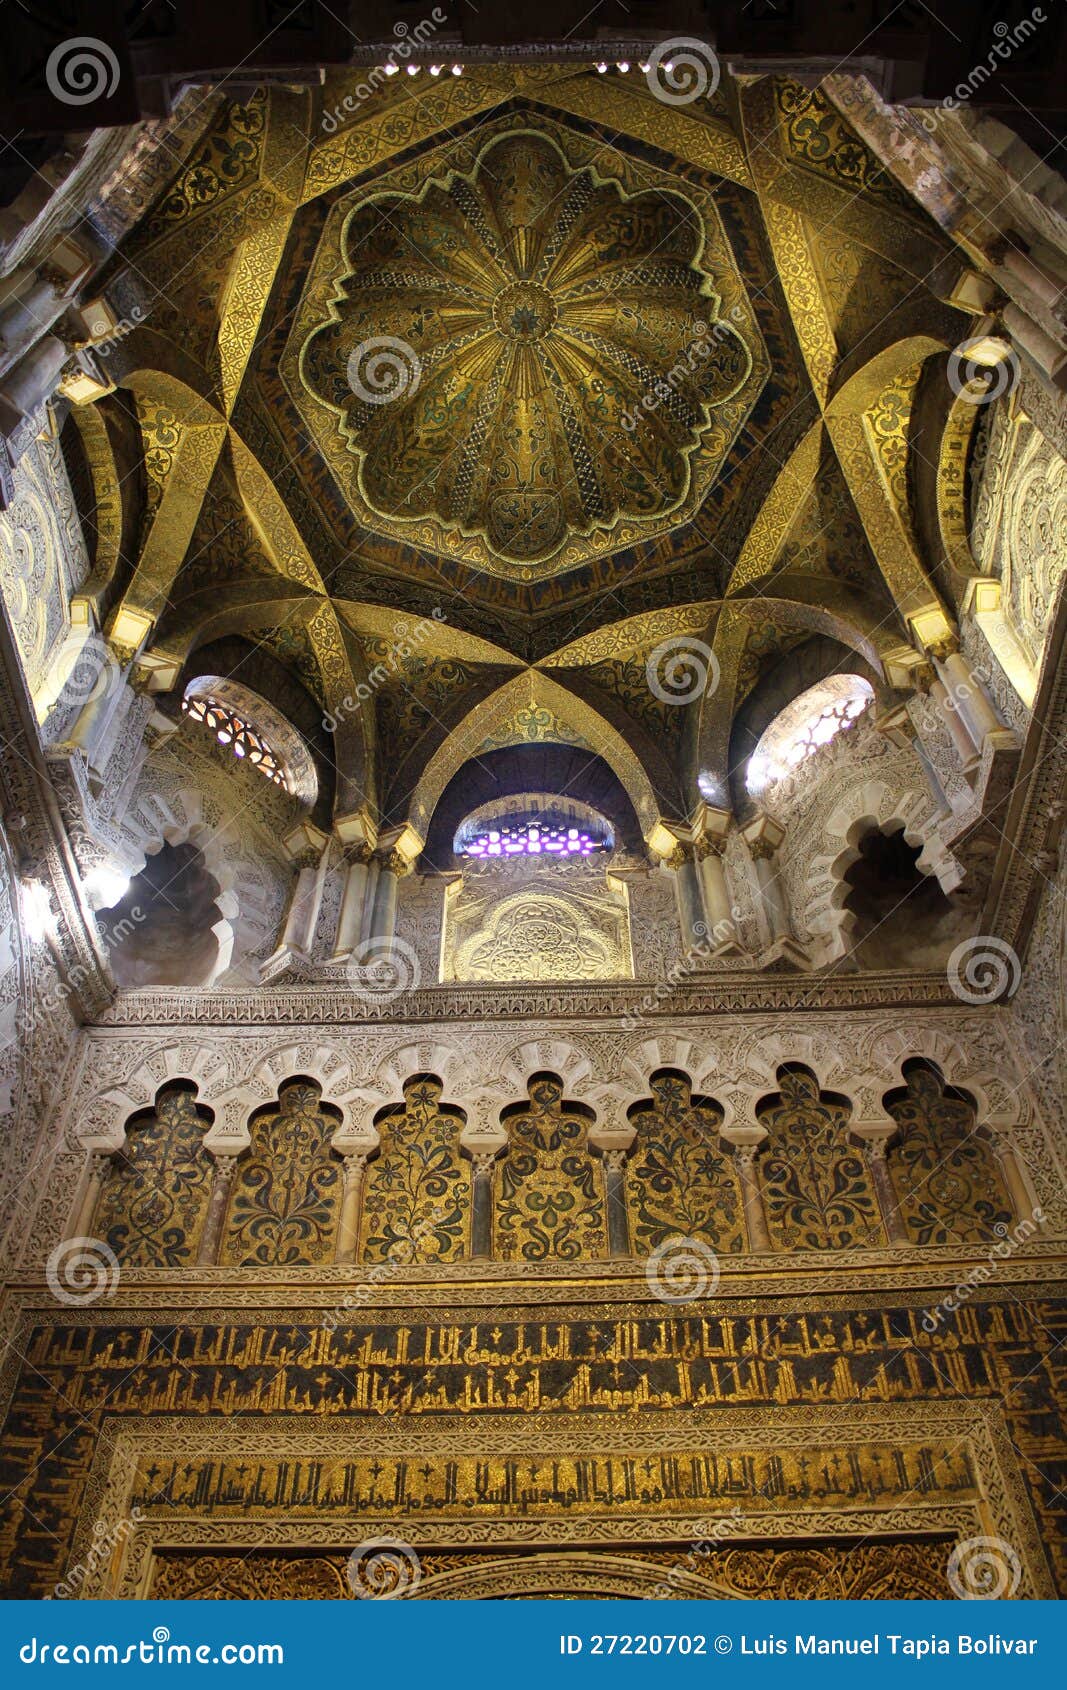 dome on the mihrab in the mosque of cordoba